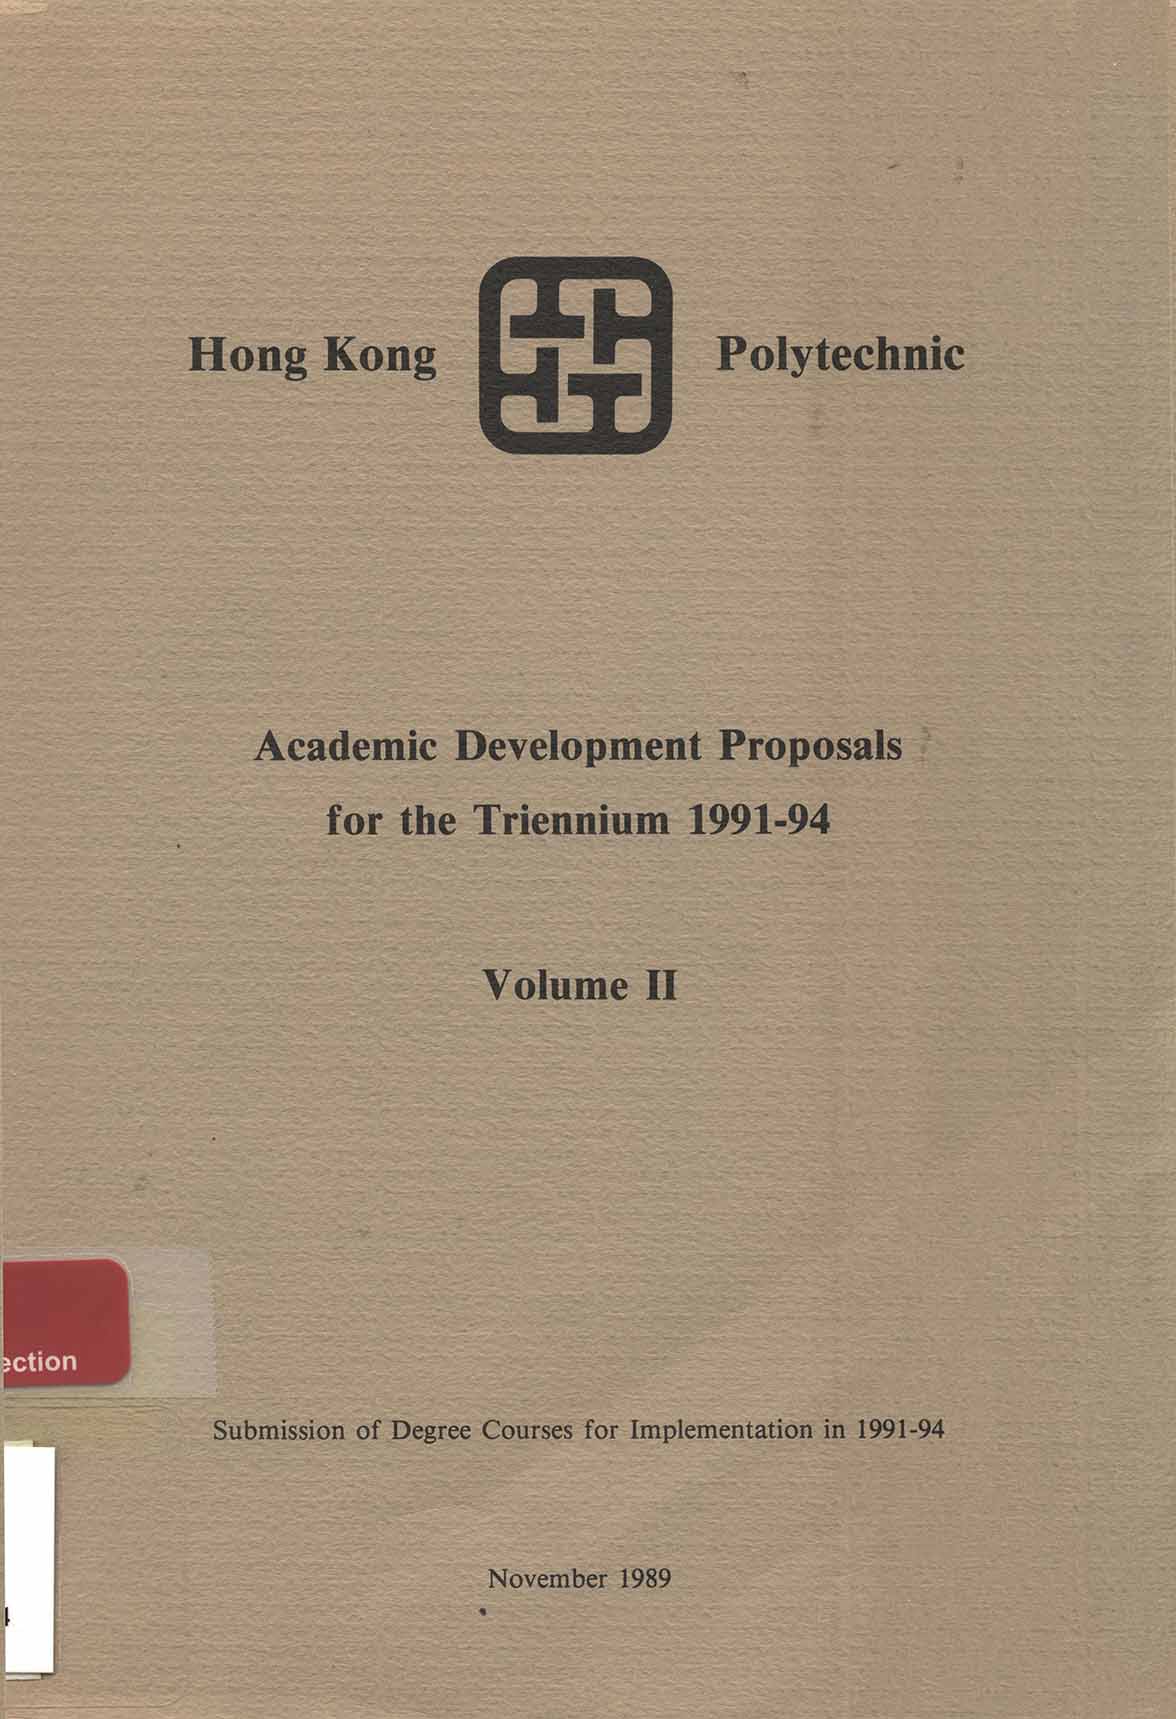 Academic development proposals for the Triennium [1991-94] : Volume II - Submissions of Degree courses for implementation in 1991-94 